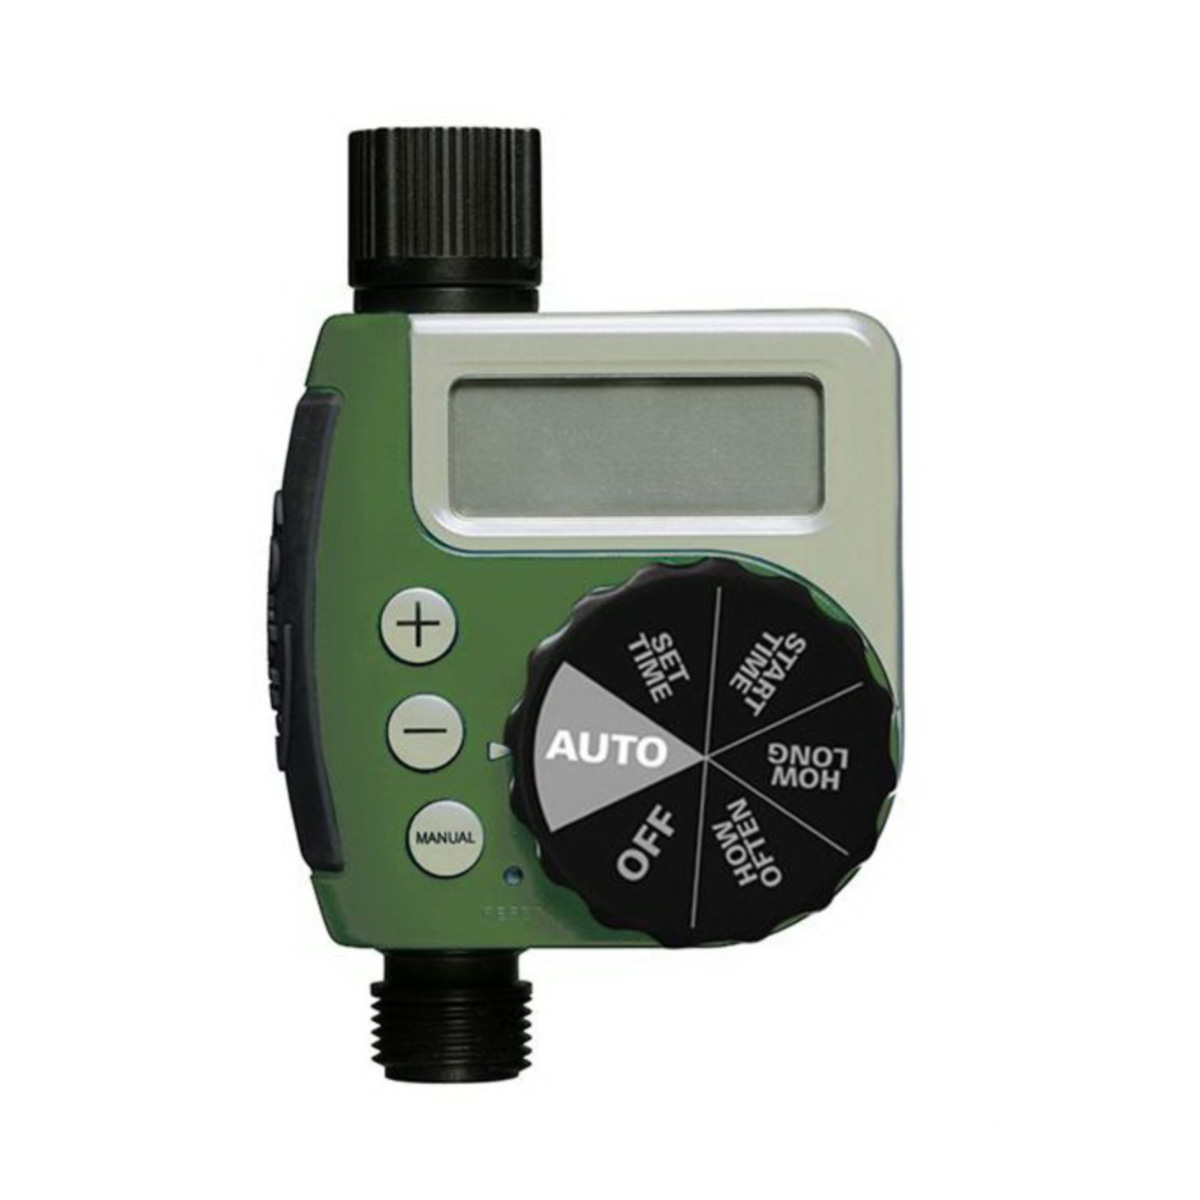 27936 Hose Faucet Timer, 1 to 240 min